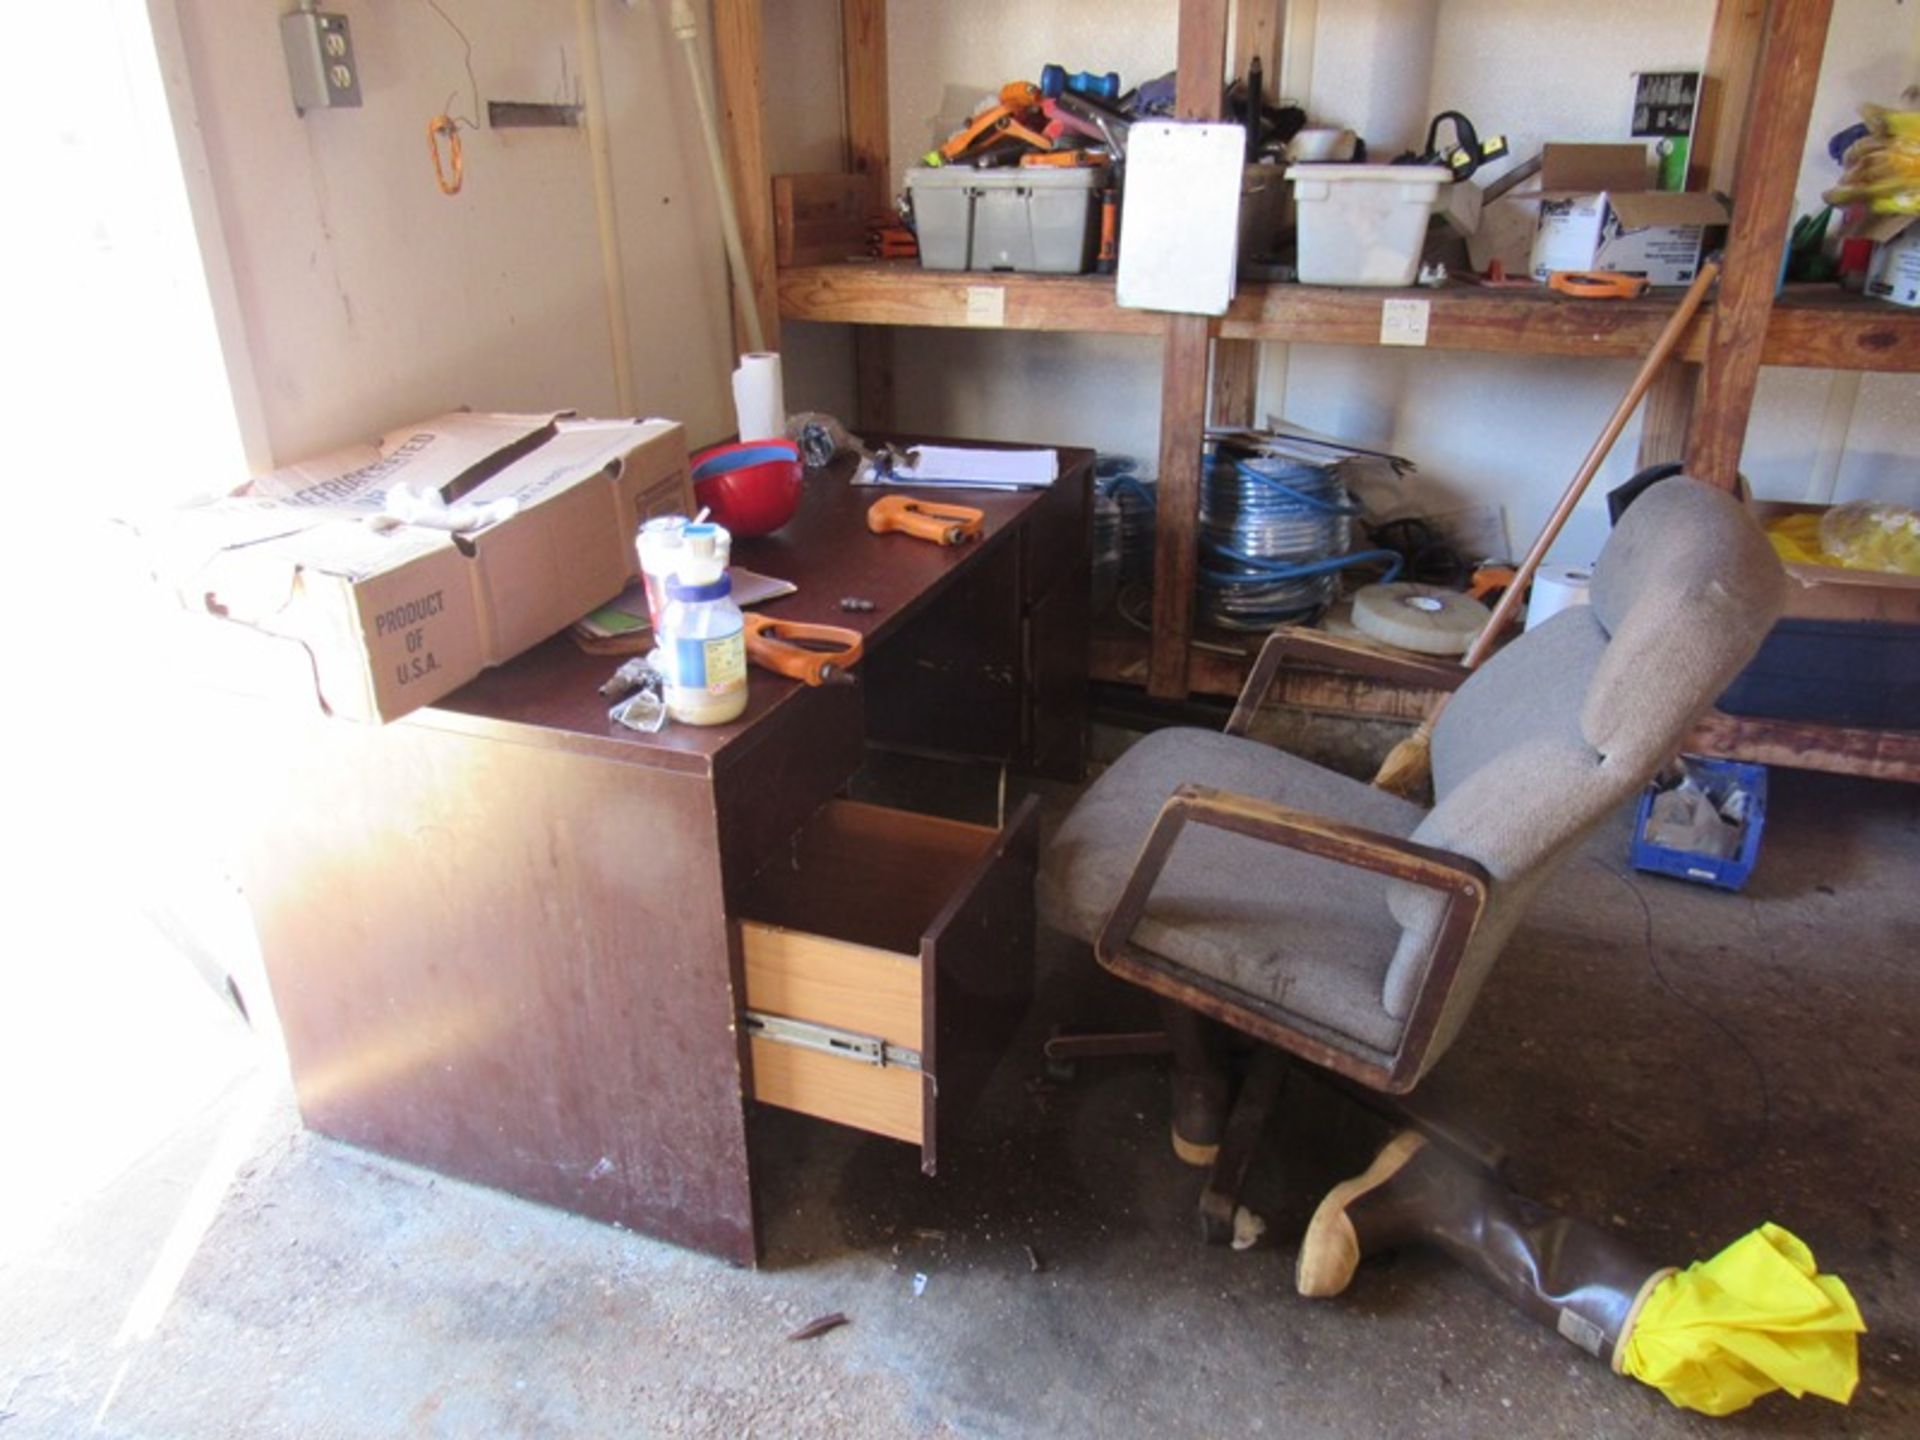 Lot Compressor Room Contents: Desk, Chairs, Hose, Sprayers, Bump Caps, Boots, Stainless Steel